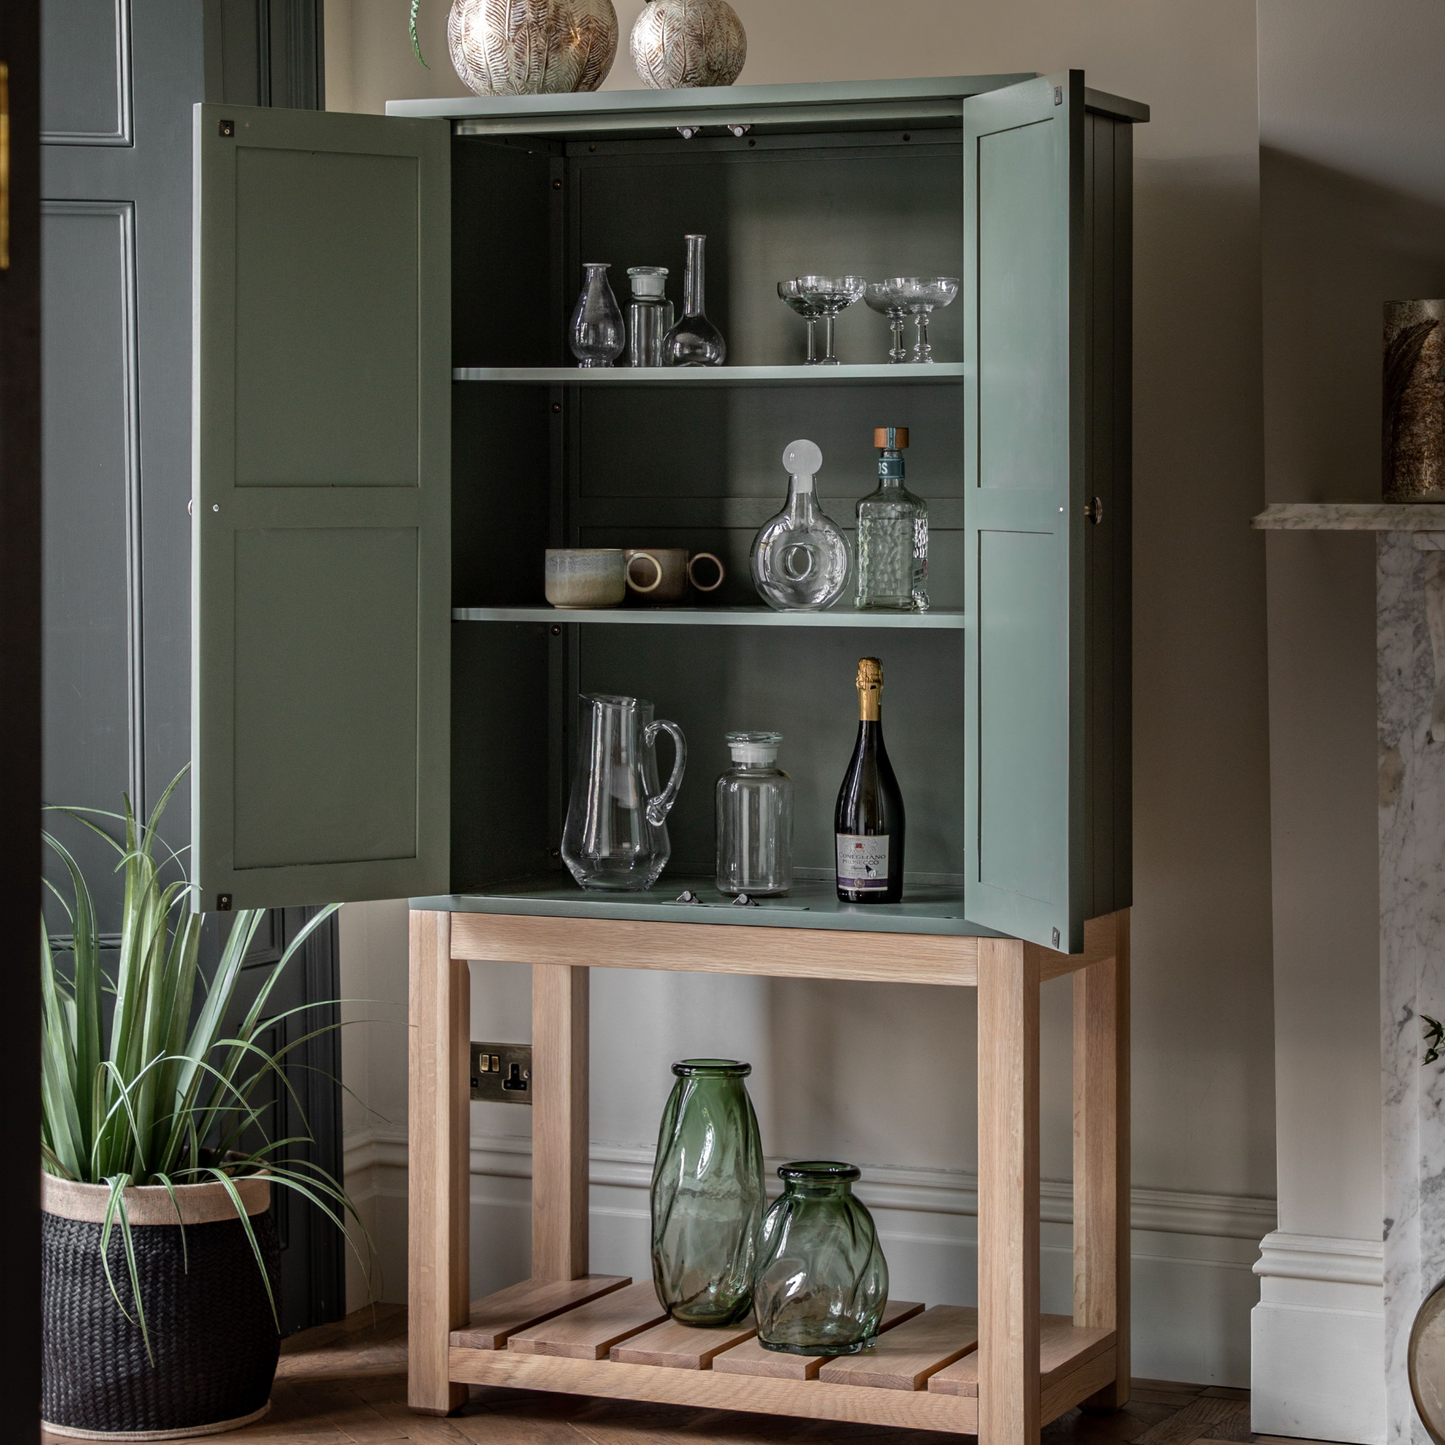 A Buckland 2 Door Storage Cupboard in Moss (w)900x(d)450x(h)1700mm for home furniture and interior decor from Kikiathome.co.uk in a